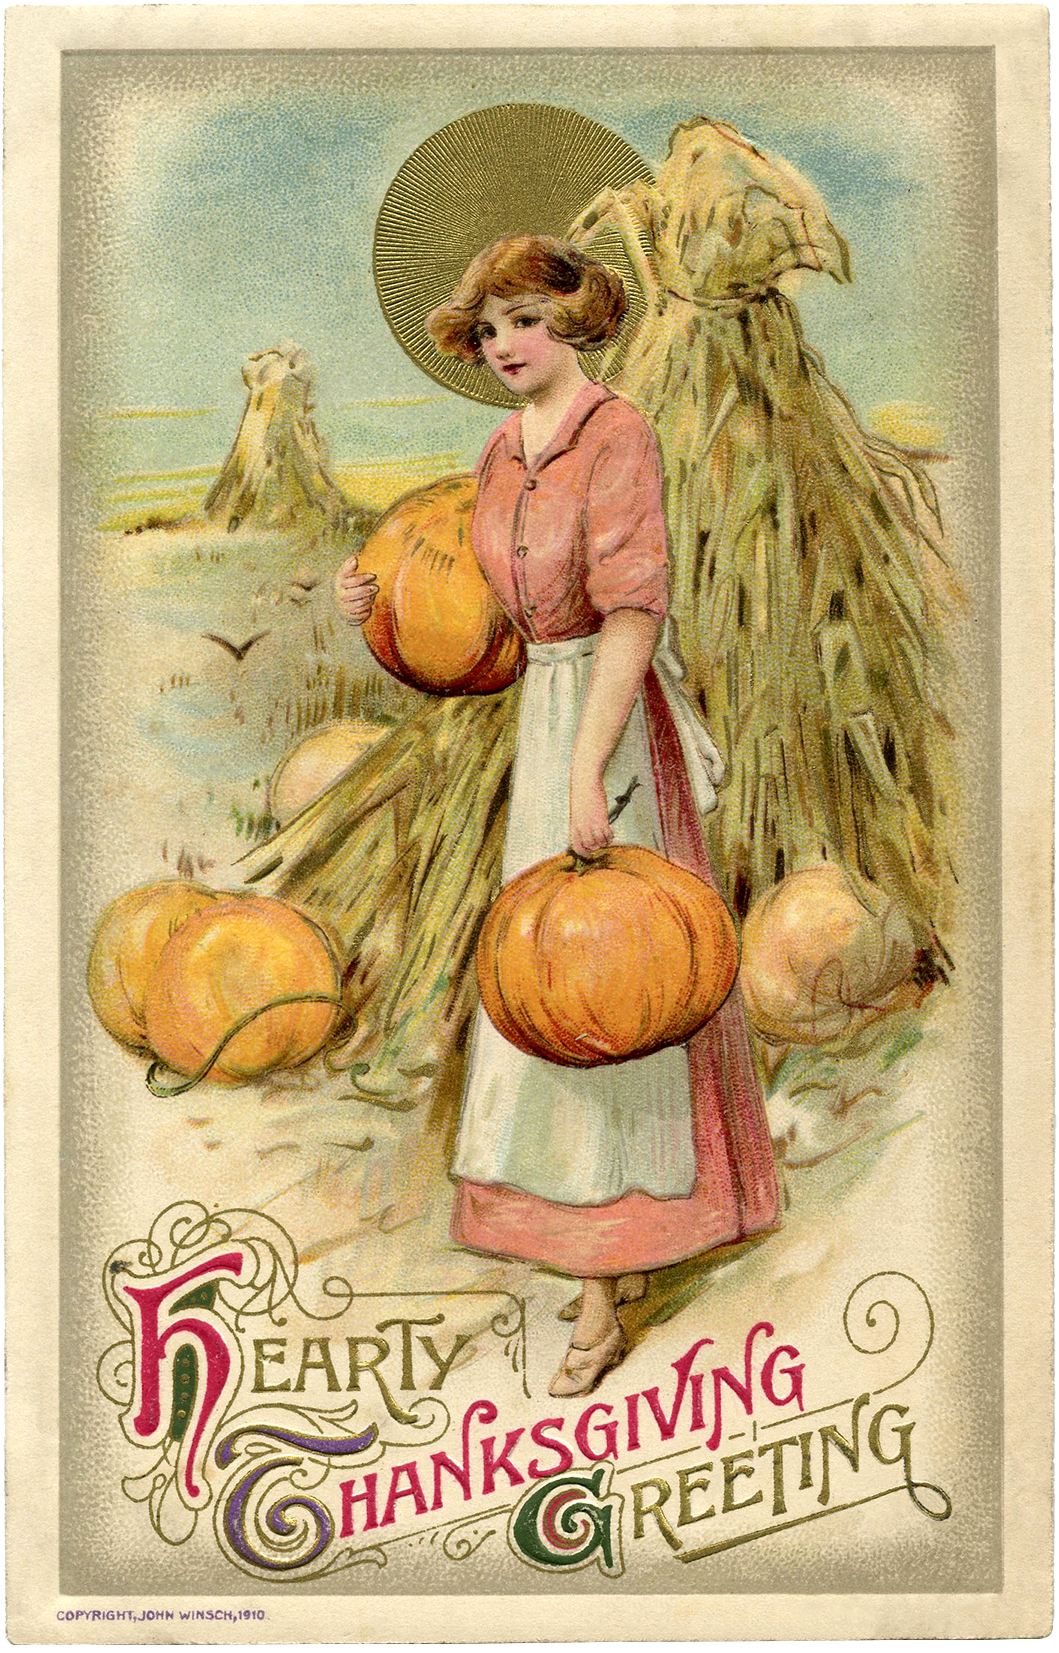 Vintage Thanksgiving Image - The Graphics Fairy